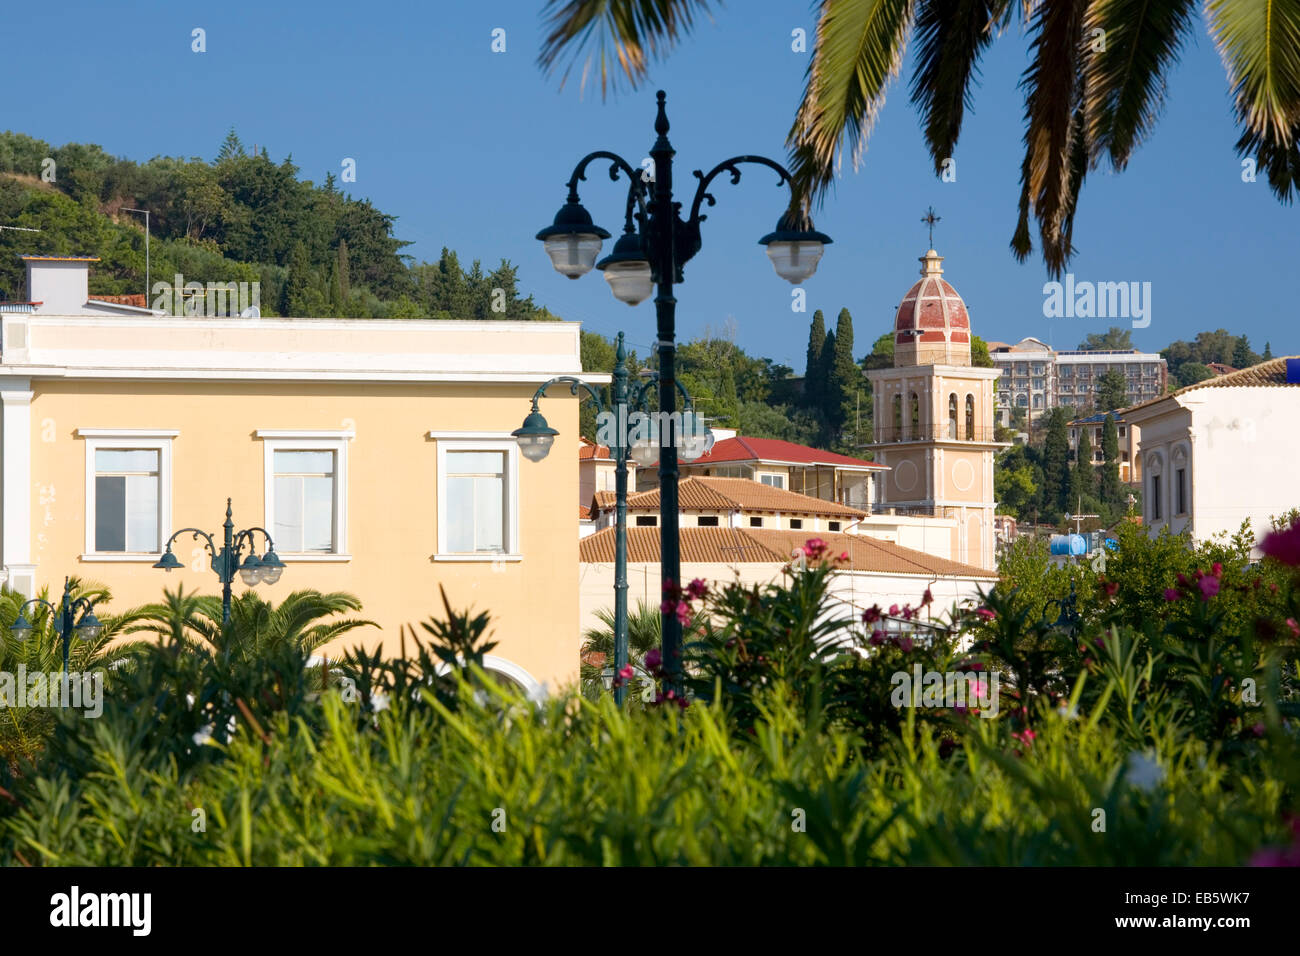 Zakynthos Town, Zakynthos, Ionian Islands, Greece. A verdant corner of the town, church bell-tower prominent. Stock Photo